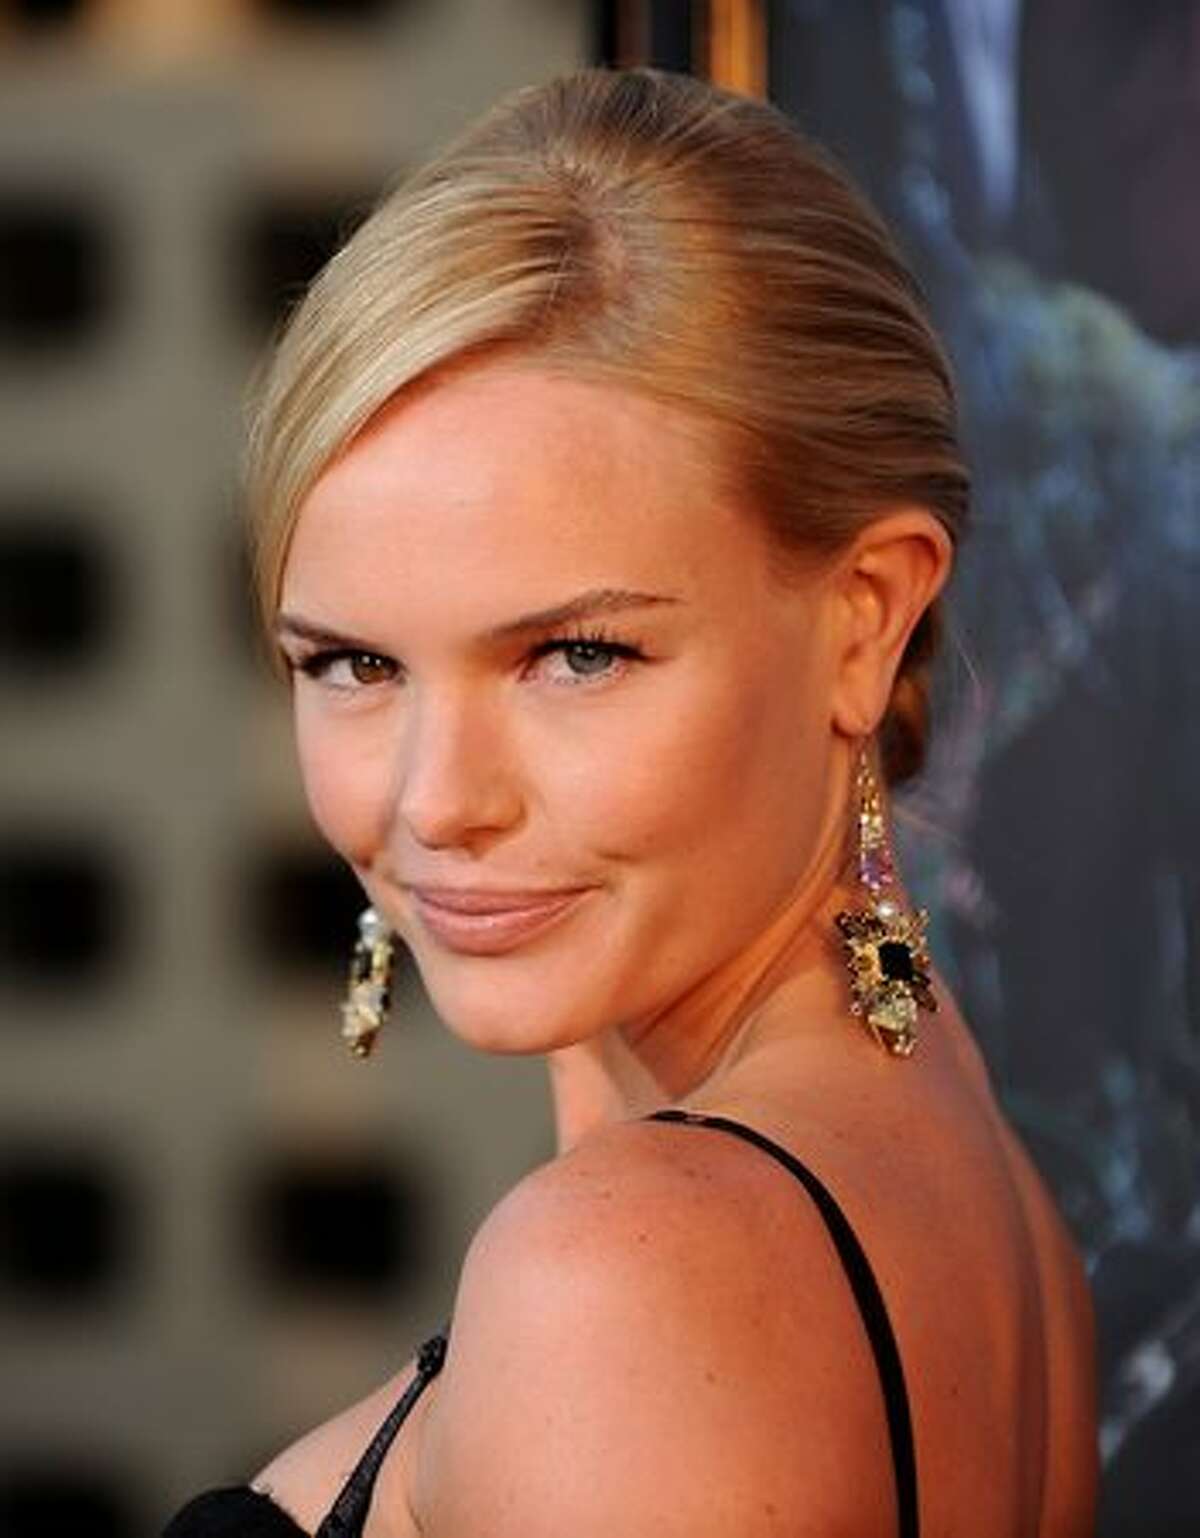 Actress Kate Bosworth arrives at the premiere of HBO's "True Blood" Season 3 at The Cinerama Dome.